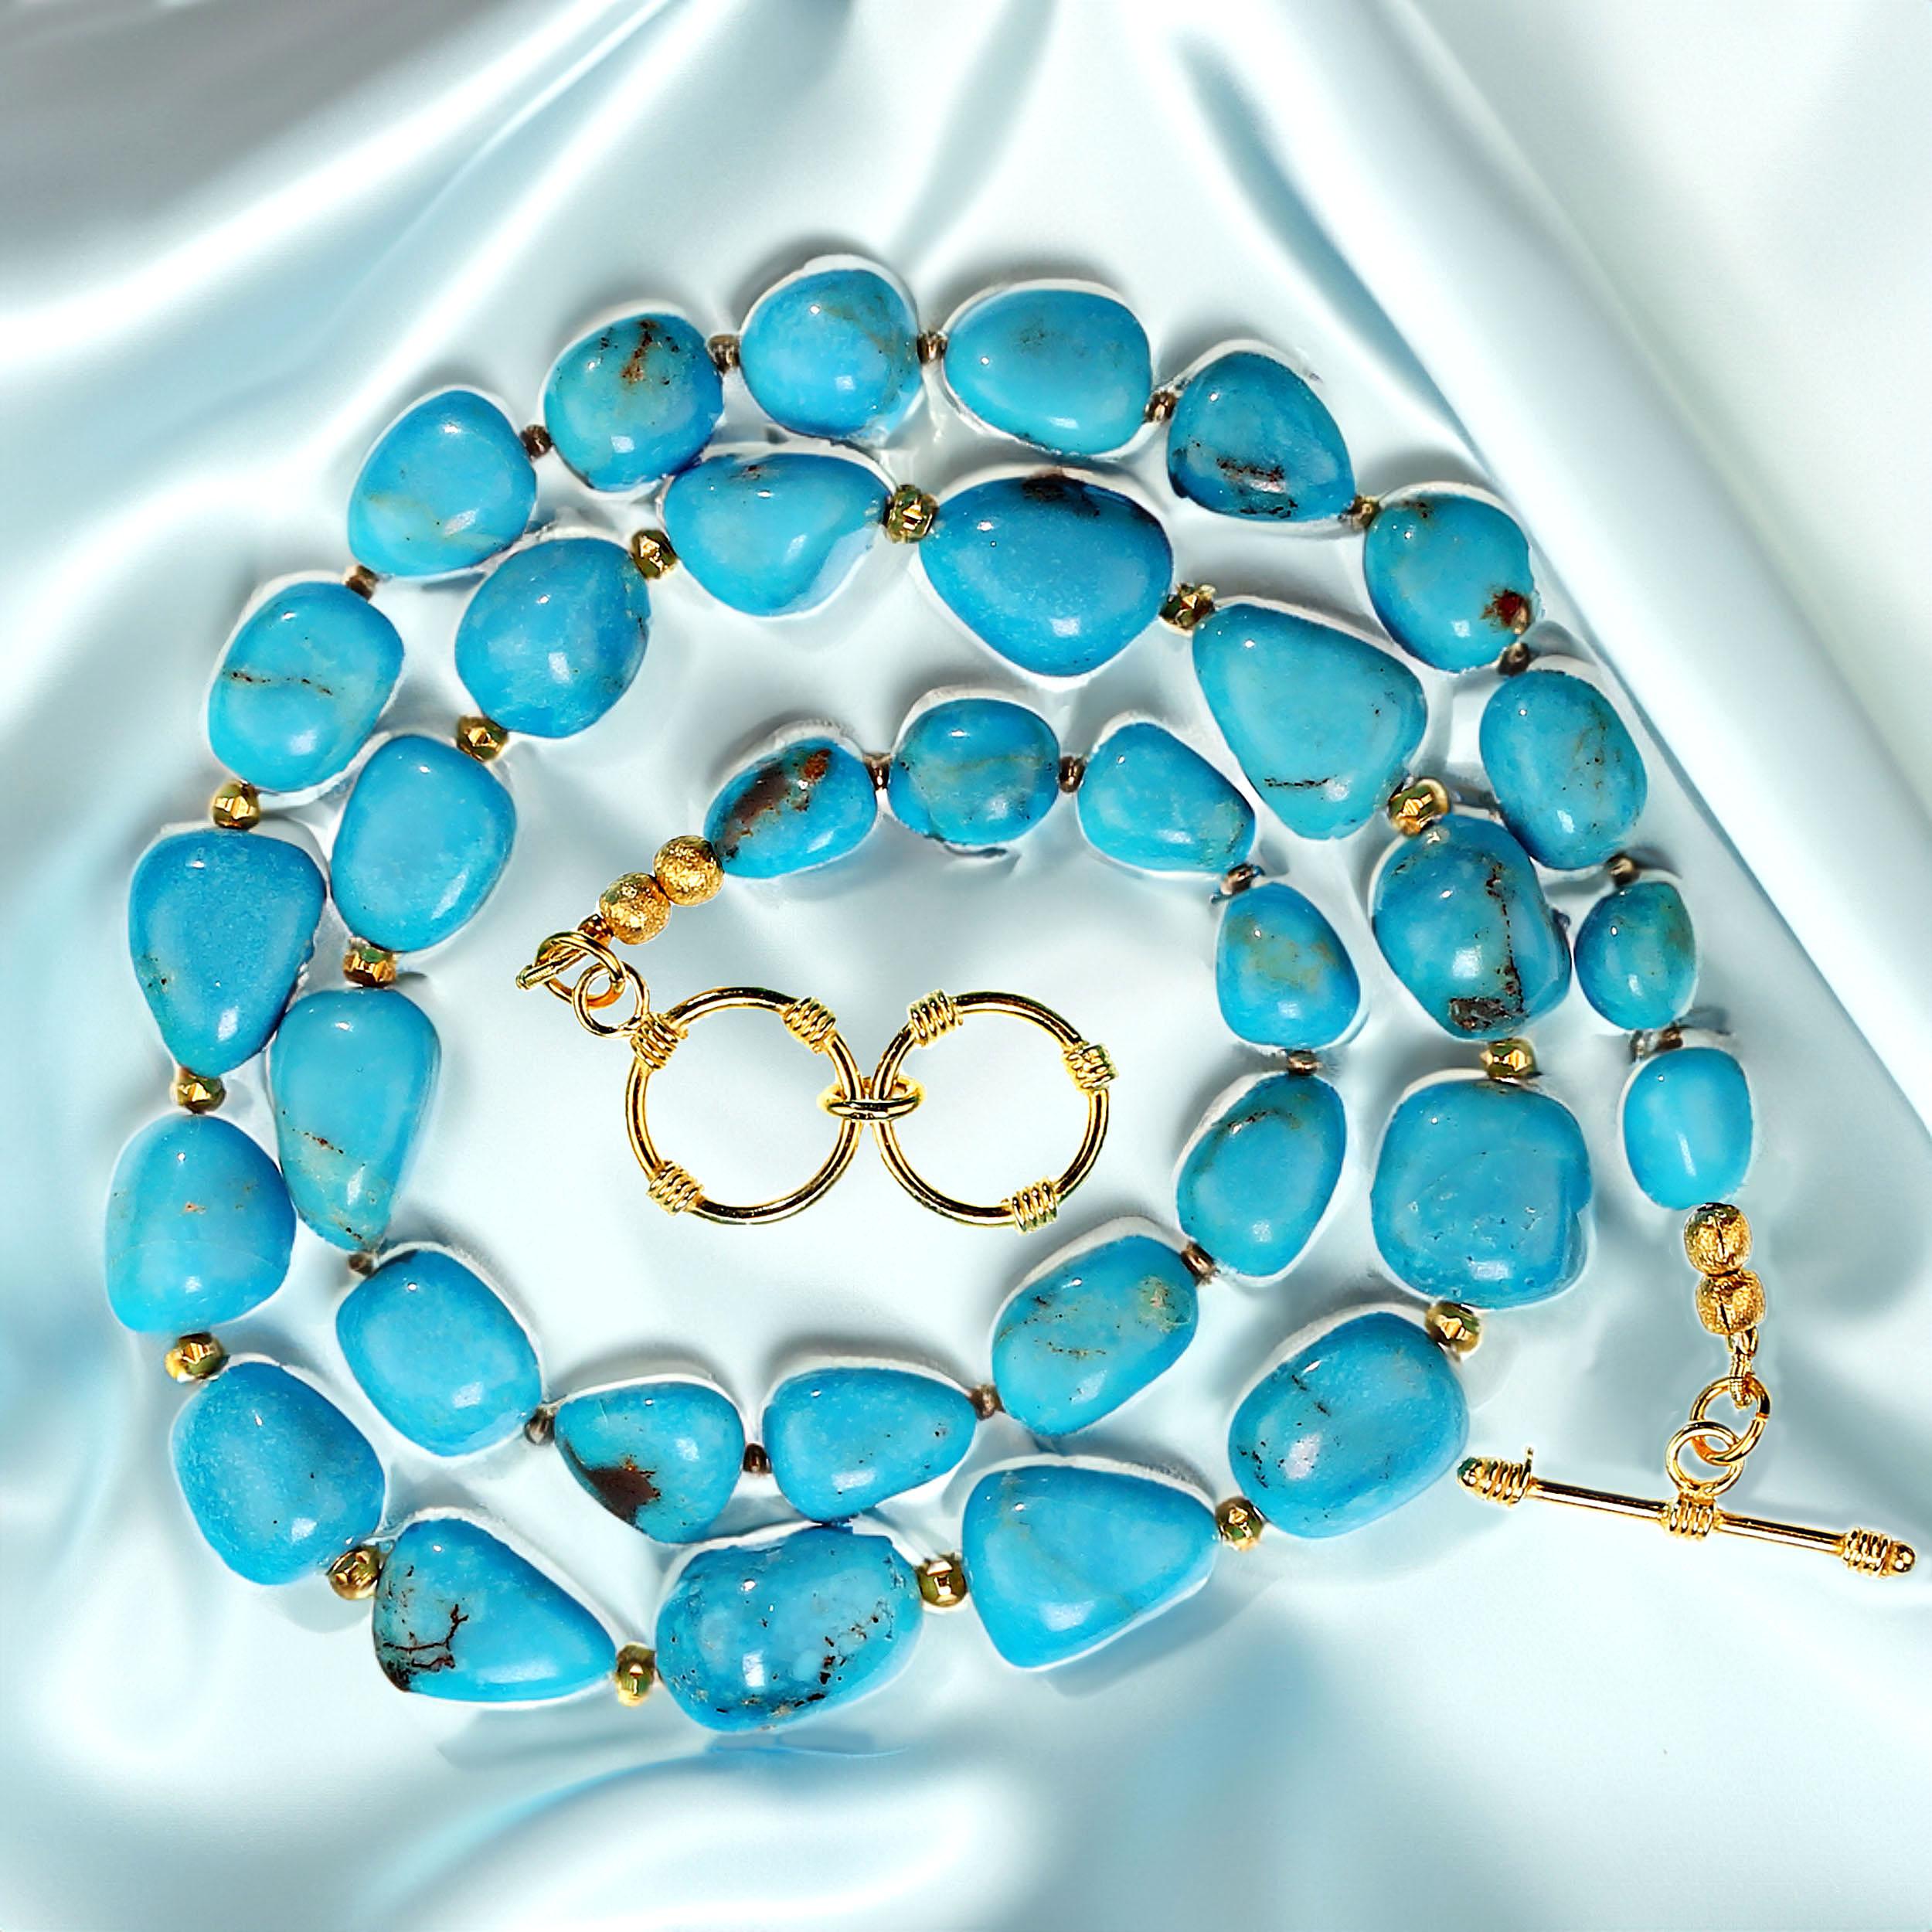 Women's or Men's AJD Stunning Sleeping Beauty Turquoise Nugget Necklace